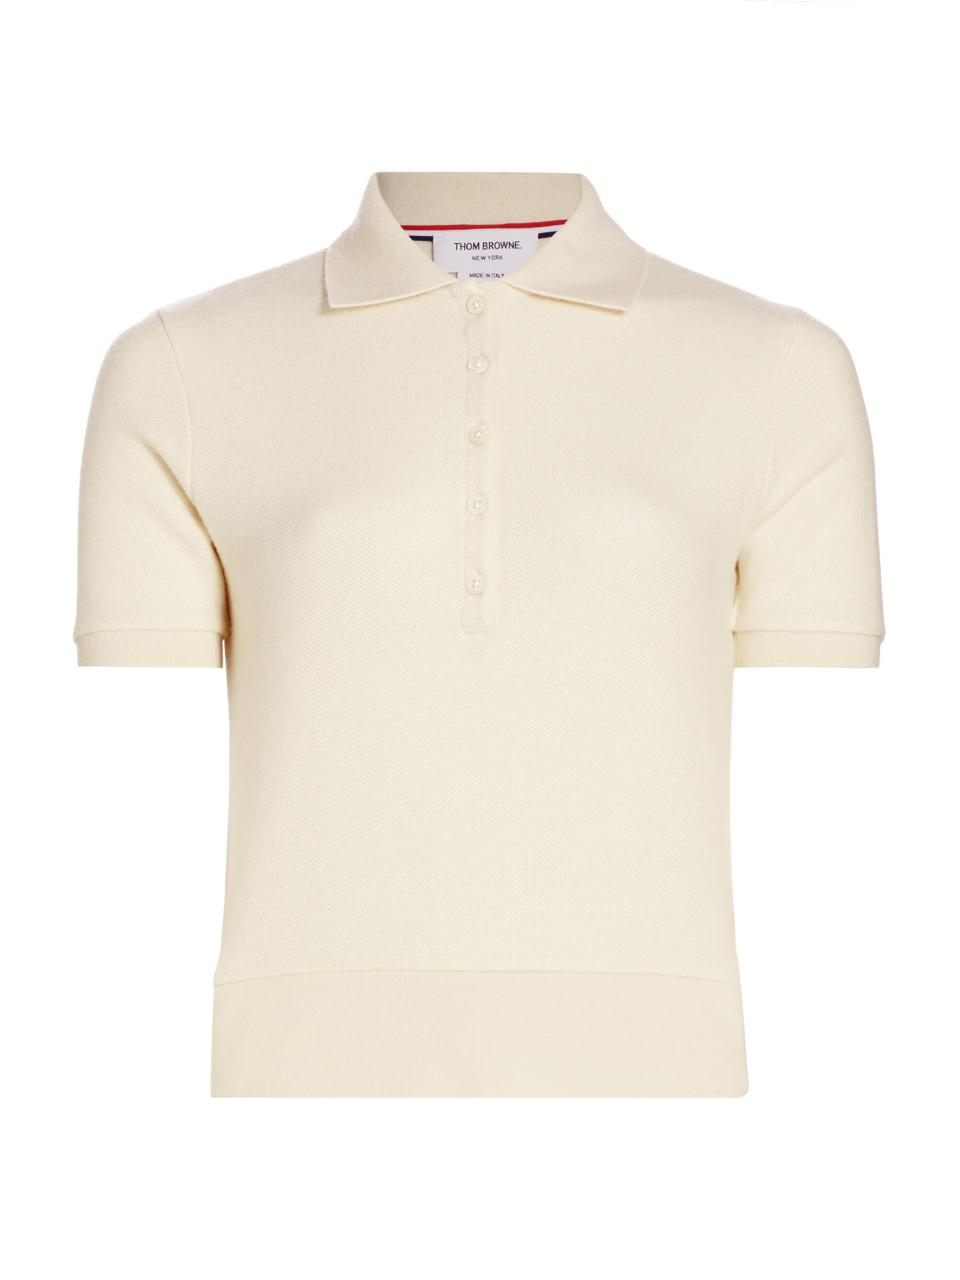 Saks and Thom Browne Pique Polo Shirt